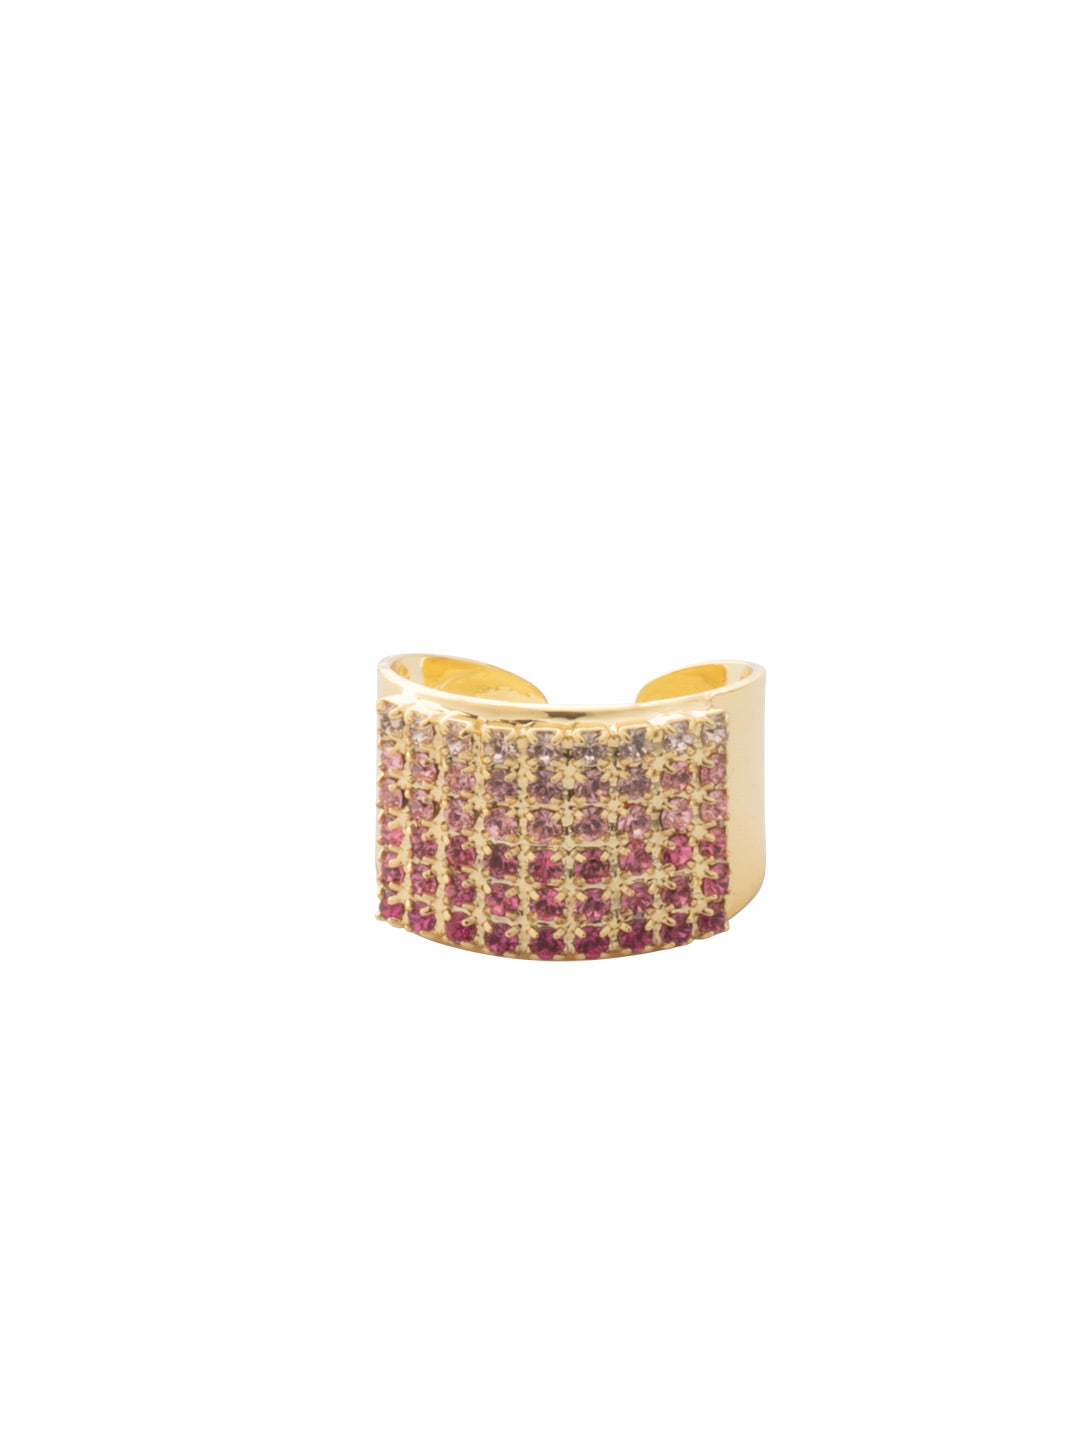 Mini Crystal Pave Cocktail Ring - RFN2BGBFL - <p>The Mini Crystal Pave Cocktail Ring features a grid of crystals embellished on a thick adjustable ring band, fitting ring sizes 4-10. From Sorrelli's Big Flirt collection in our Bright Gold-tone finish.</p>